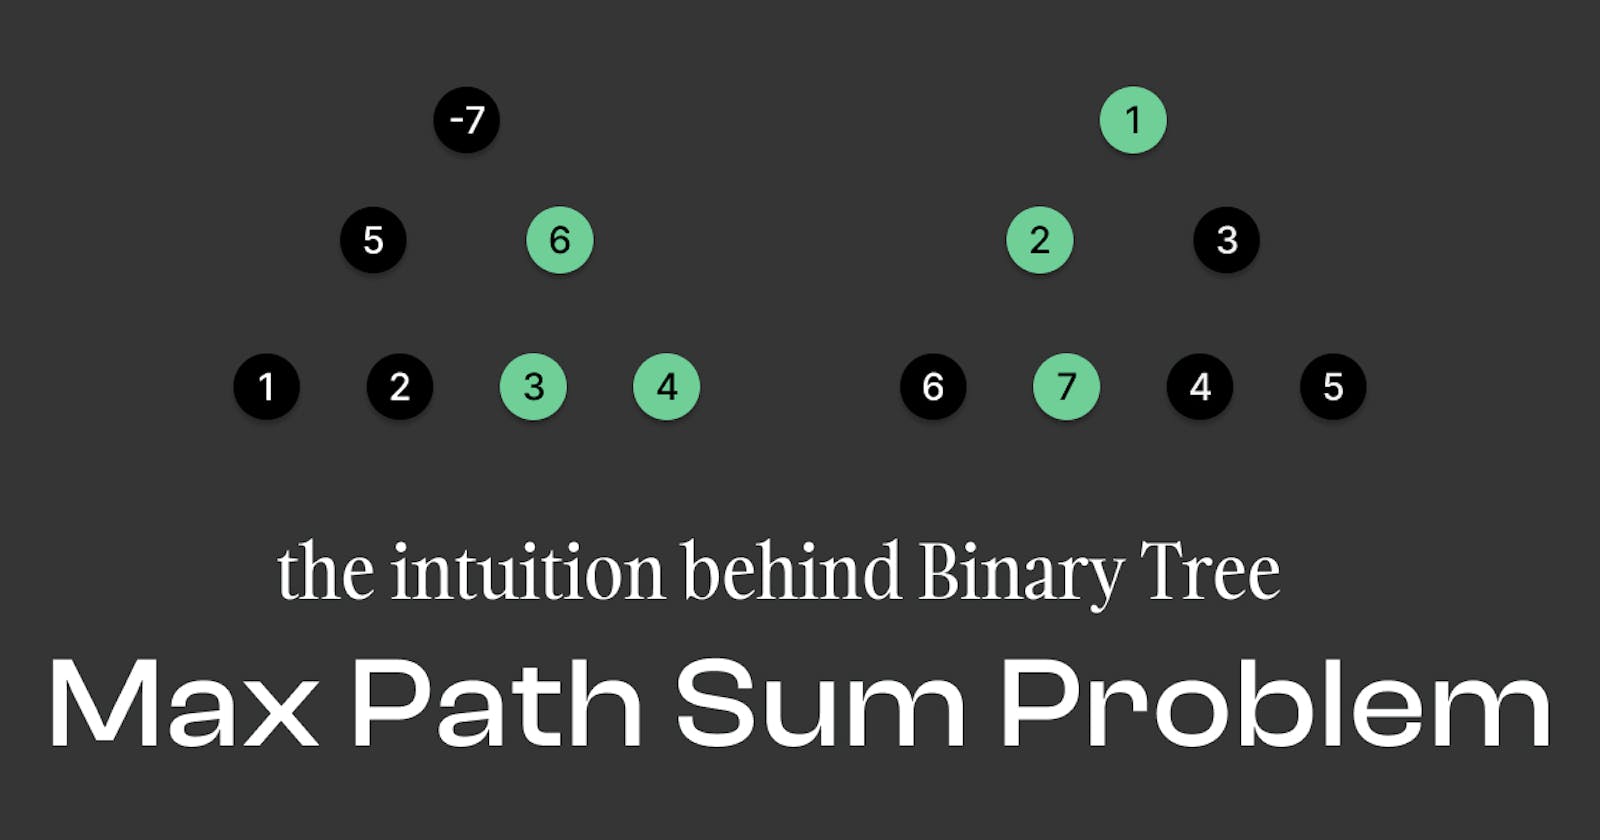 The intuition behind the Binary Tree Max Path Sum problem